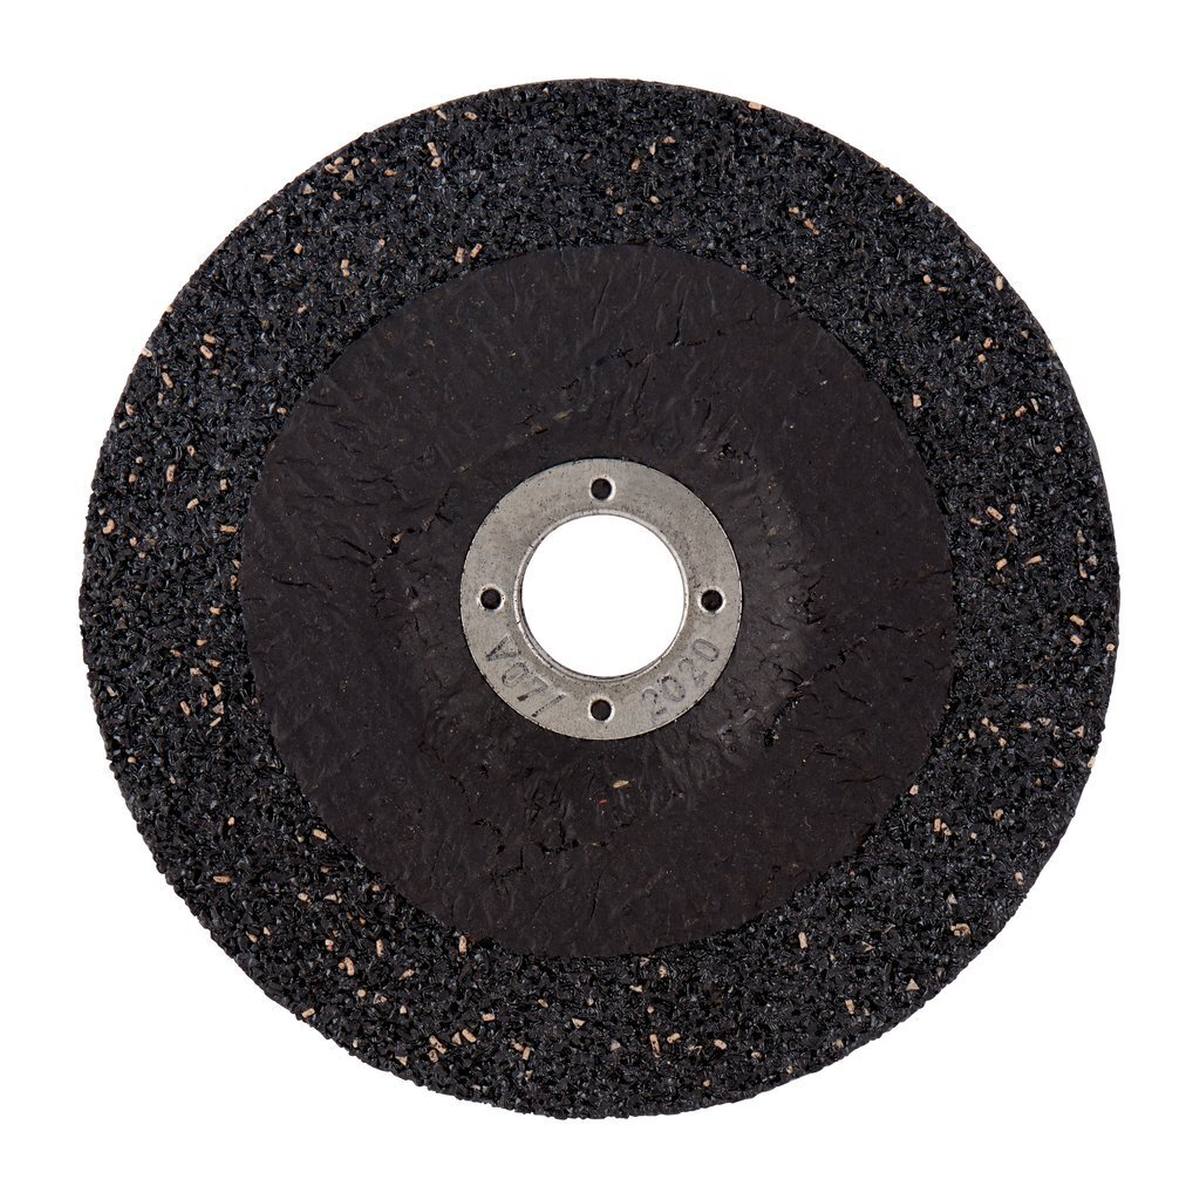 3M Silver grinding disc, 100 mm, 7.0 mm, 16 mm, type 27